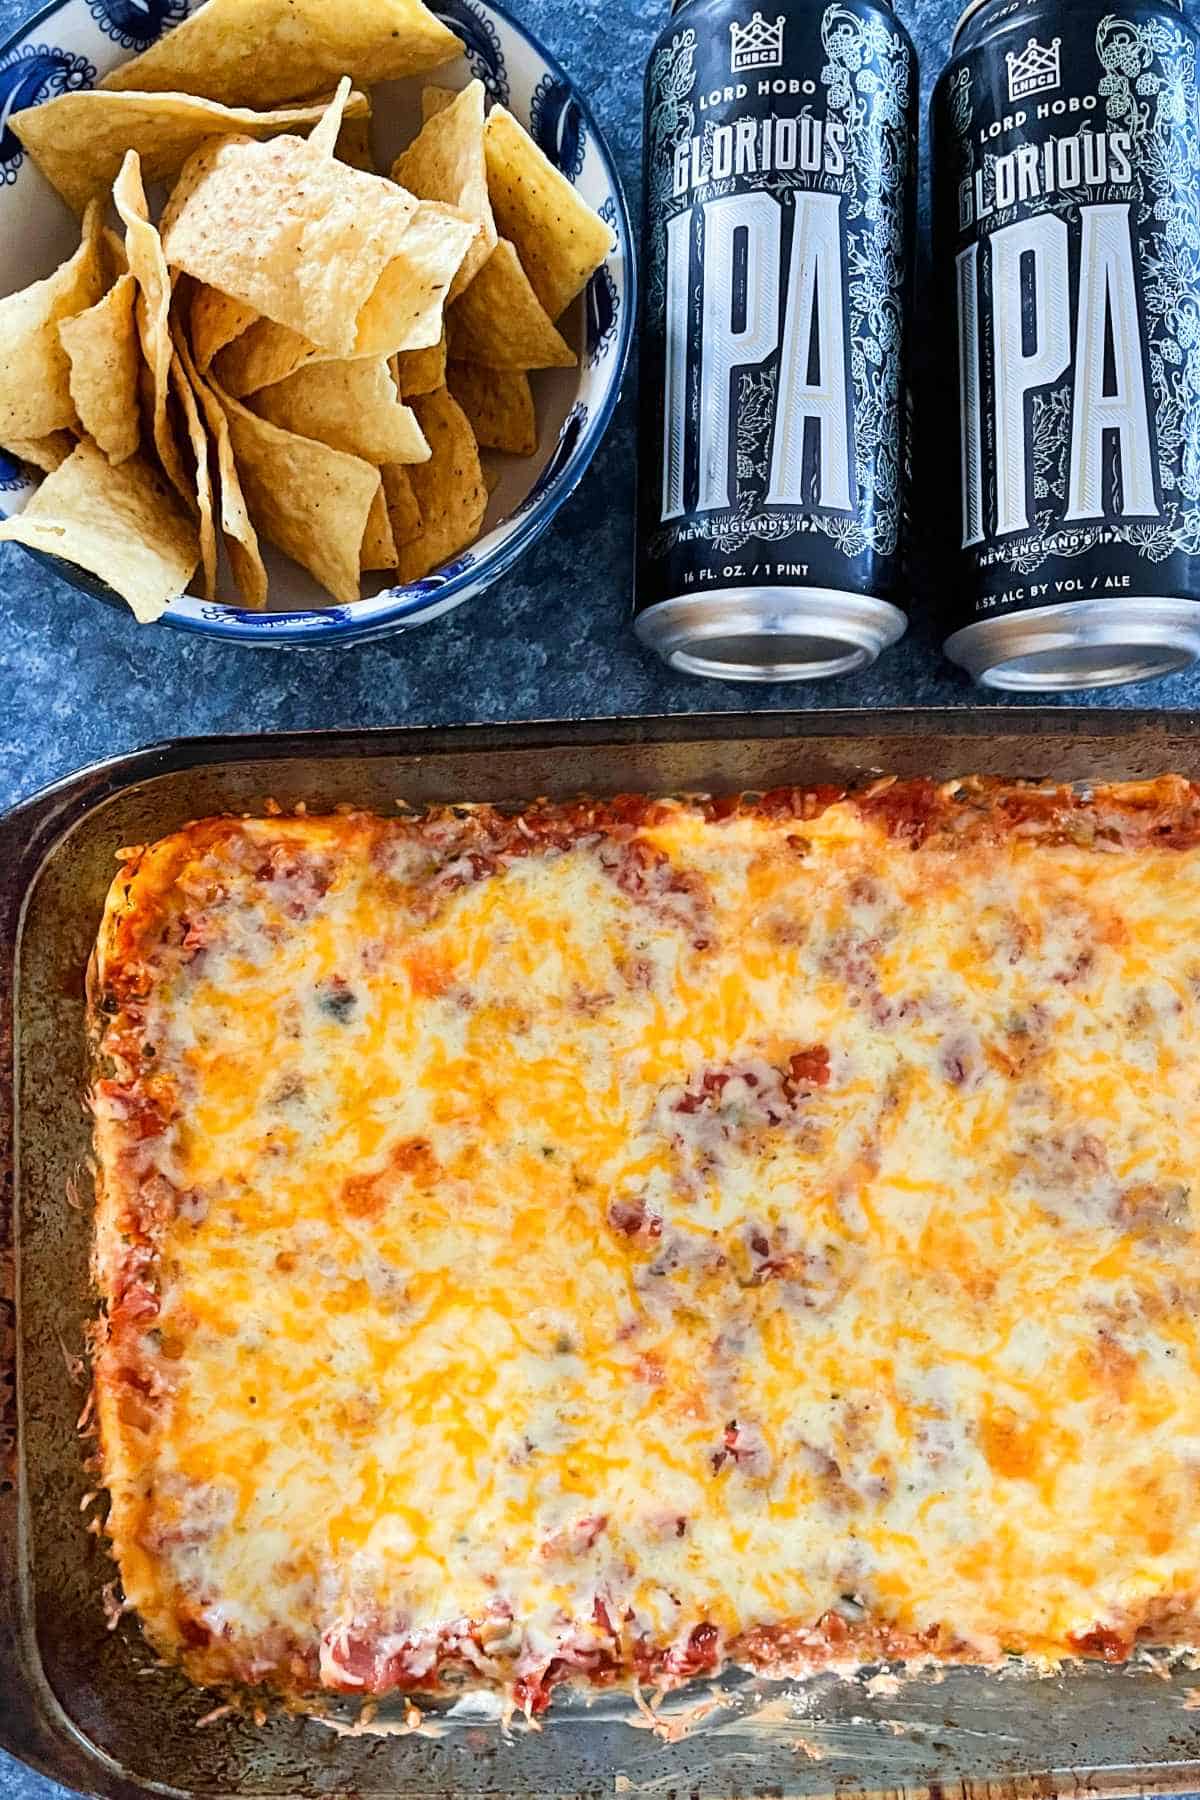 Mexican dip with melted cheese in a baking dish, with cans of Glorious IPA beer above it.